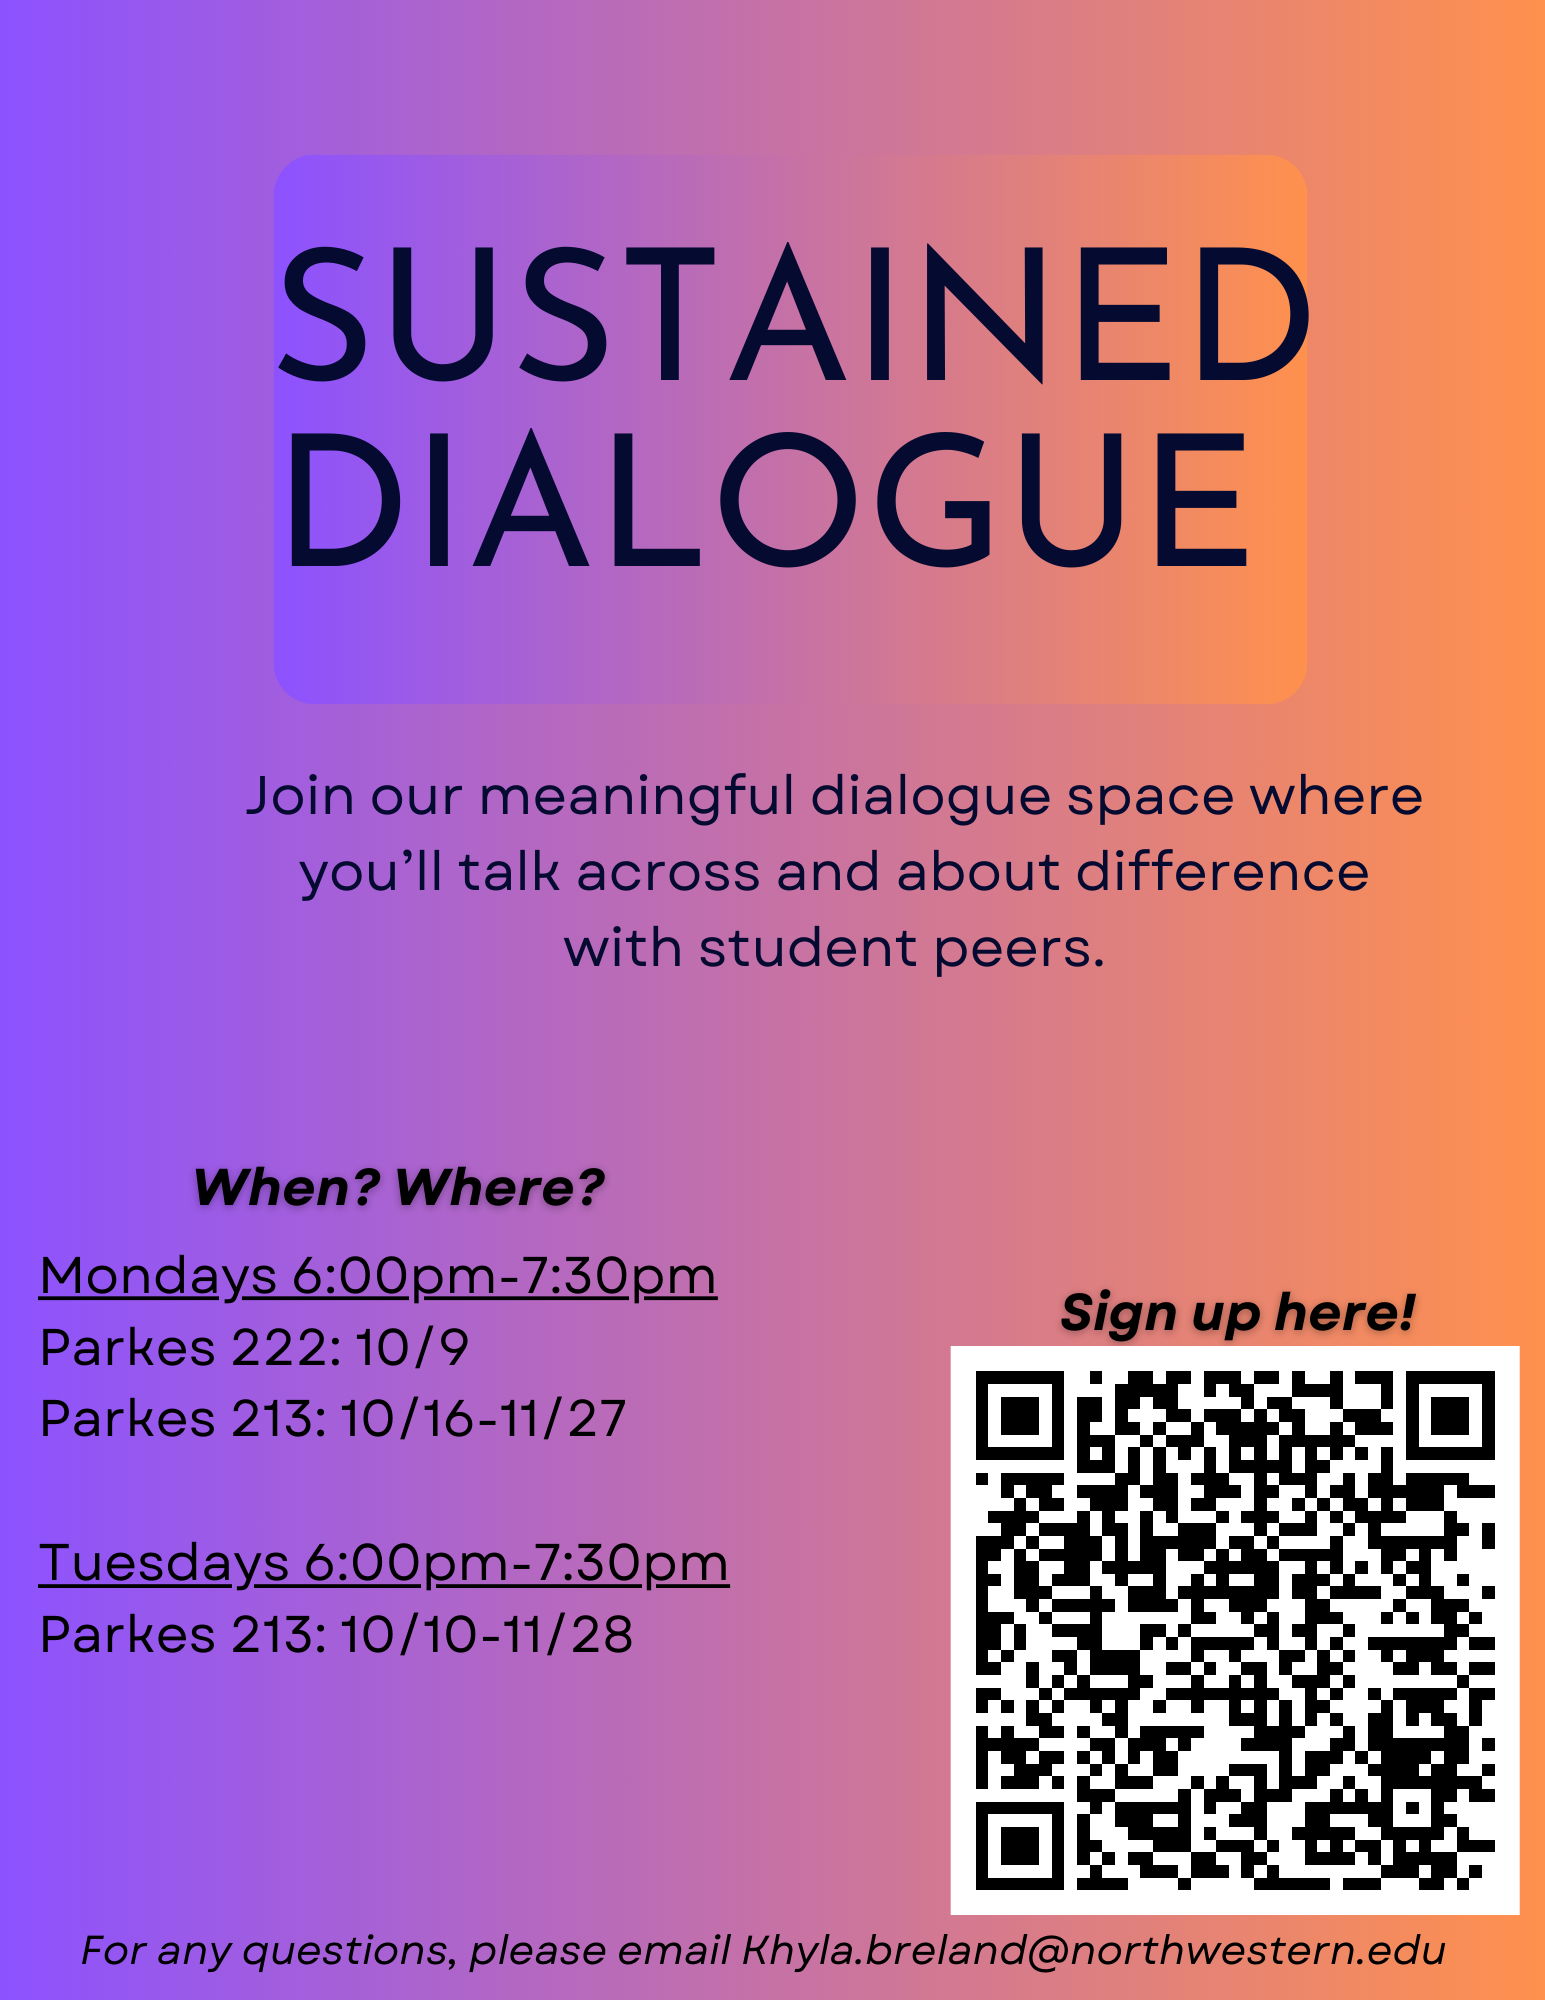 Join our meaningful dialogue space where you'll talk about and across difference with student peers.